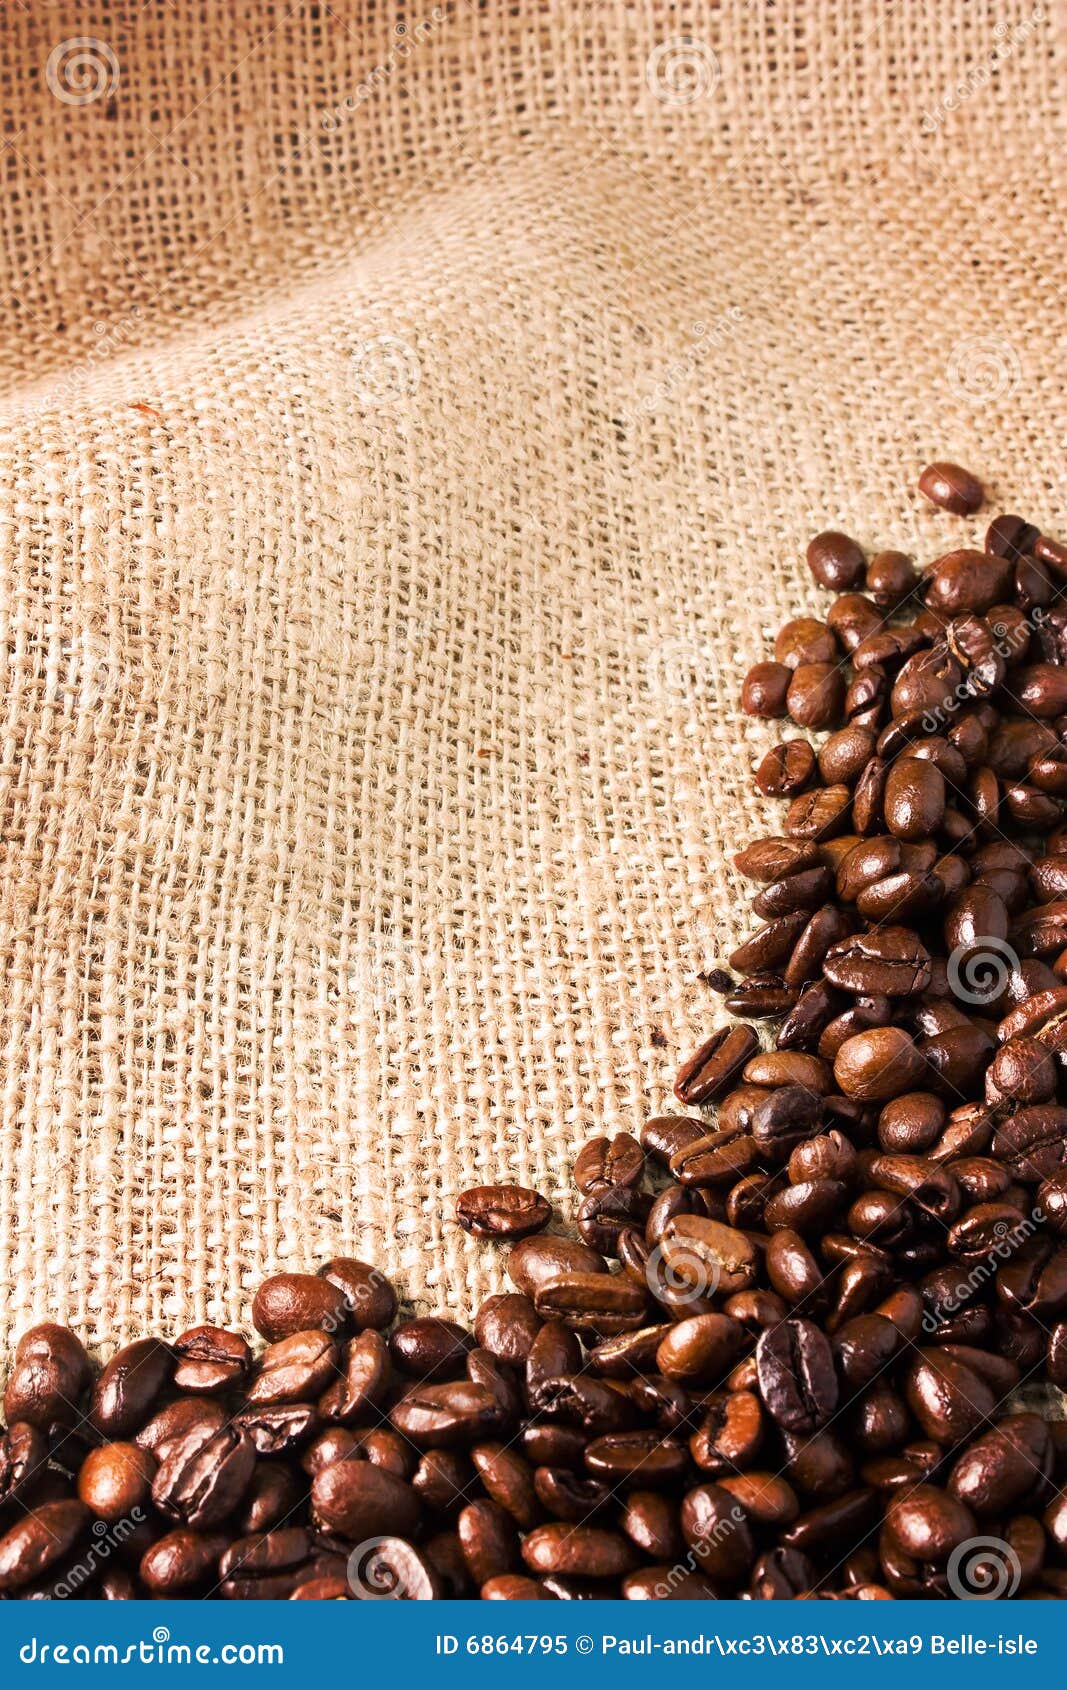 Coffee Beans On A Jute Background Stock Image Image of